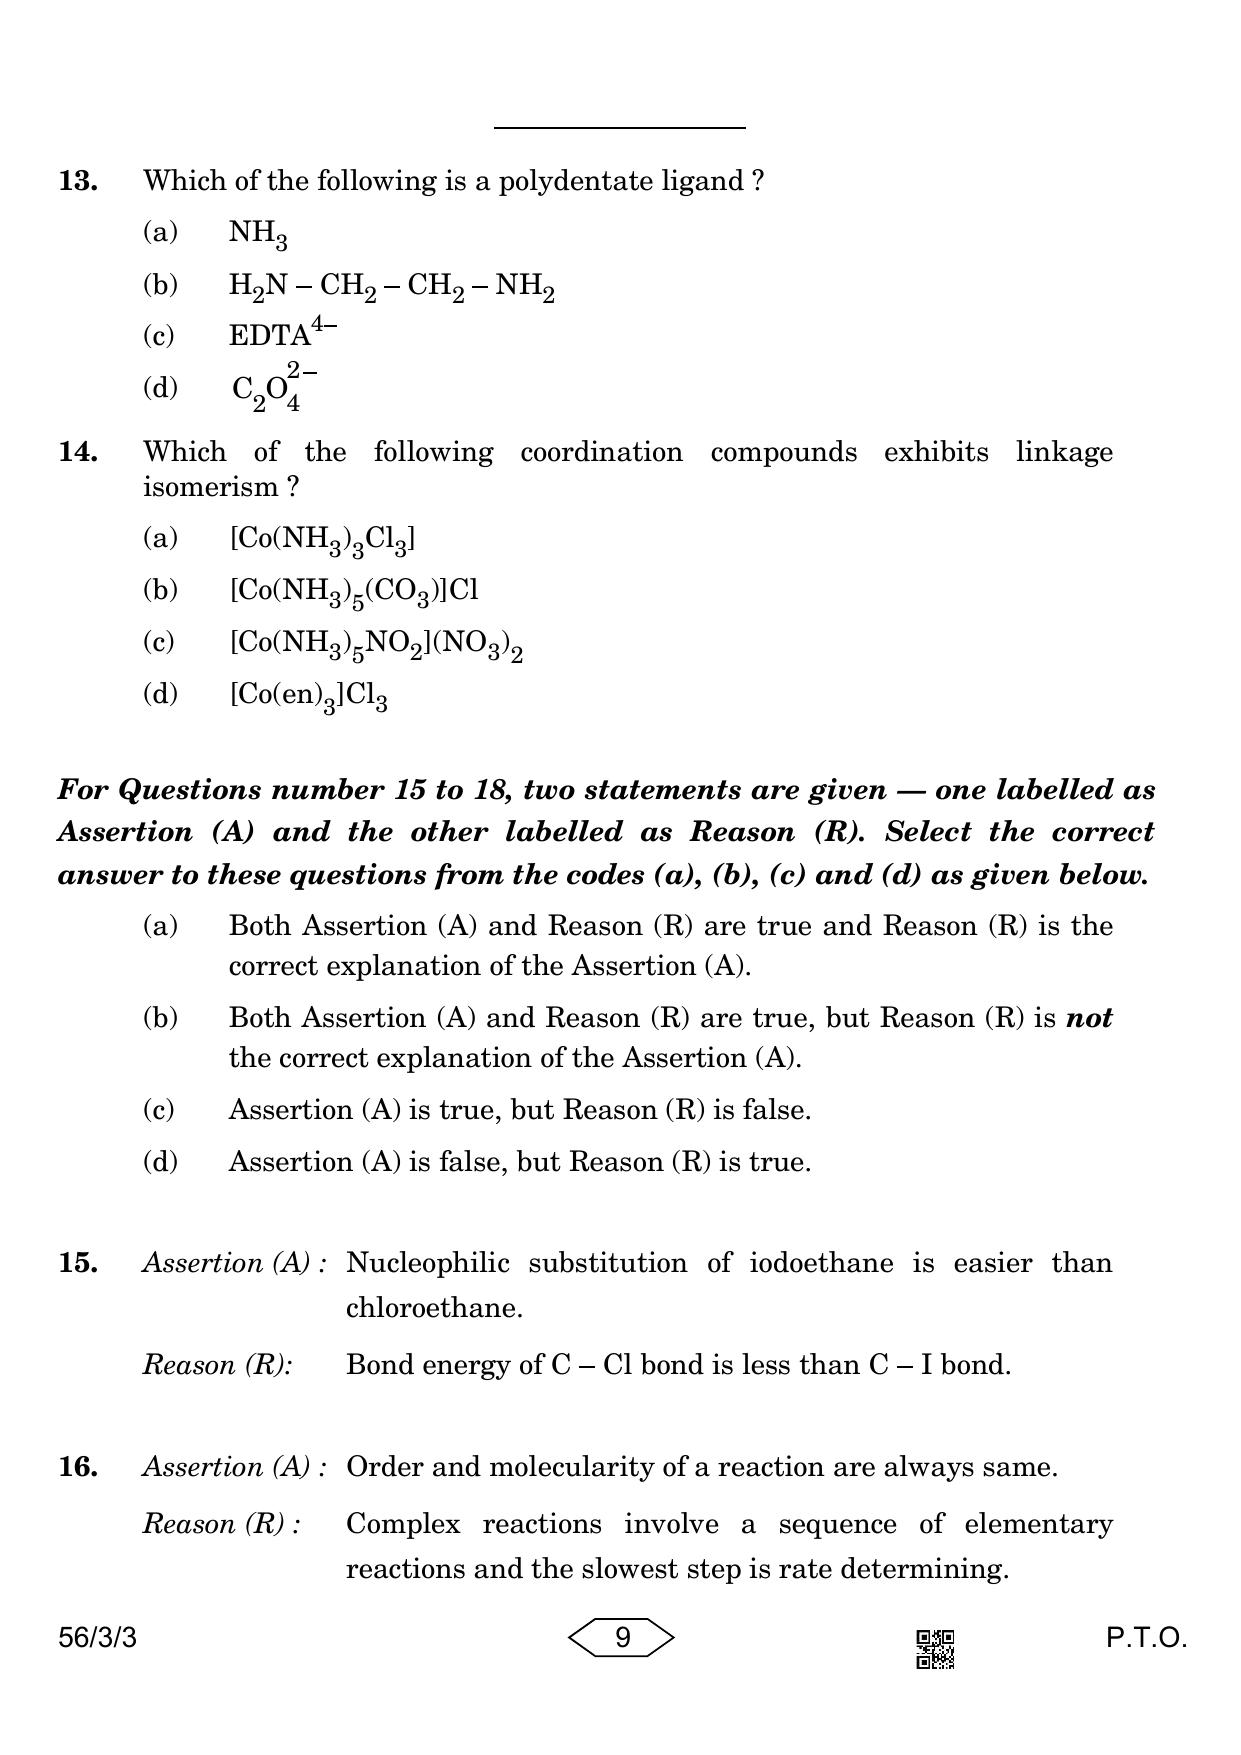 CBSE Class 12 56-3-3 Chemistry 2023 Question Paper - Page 9